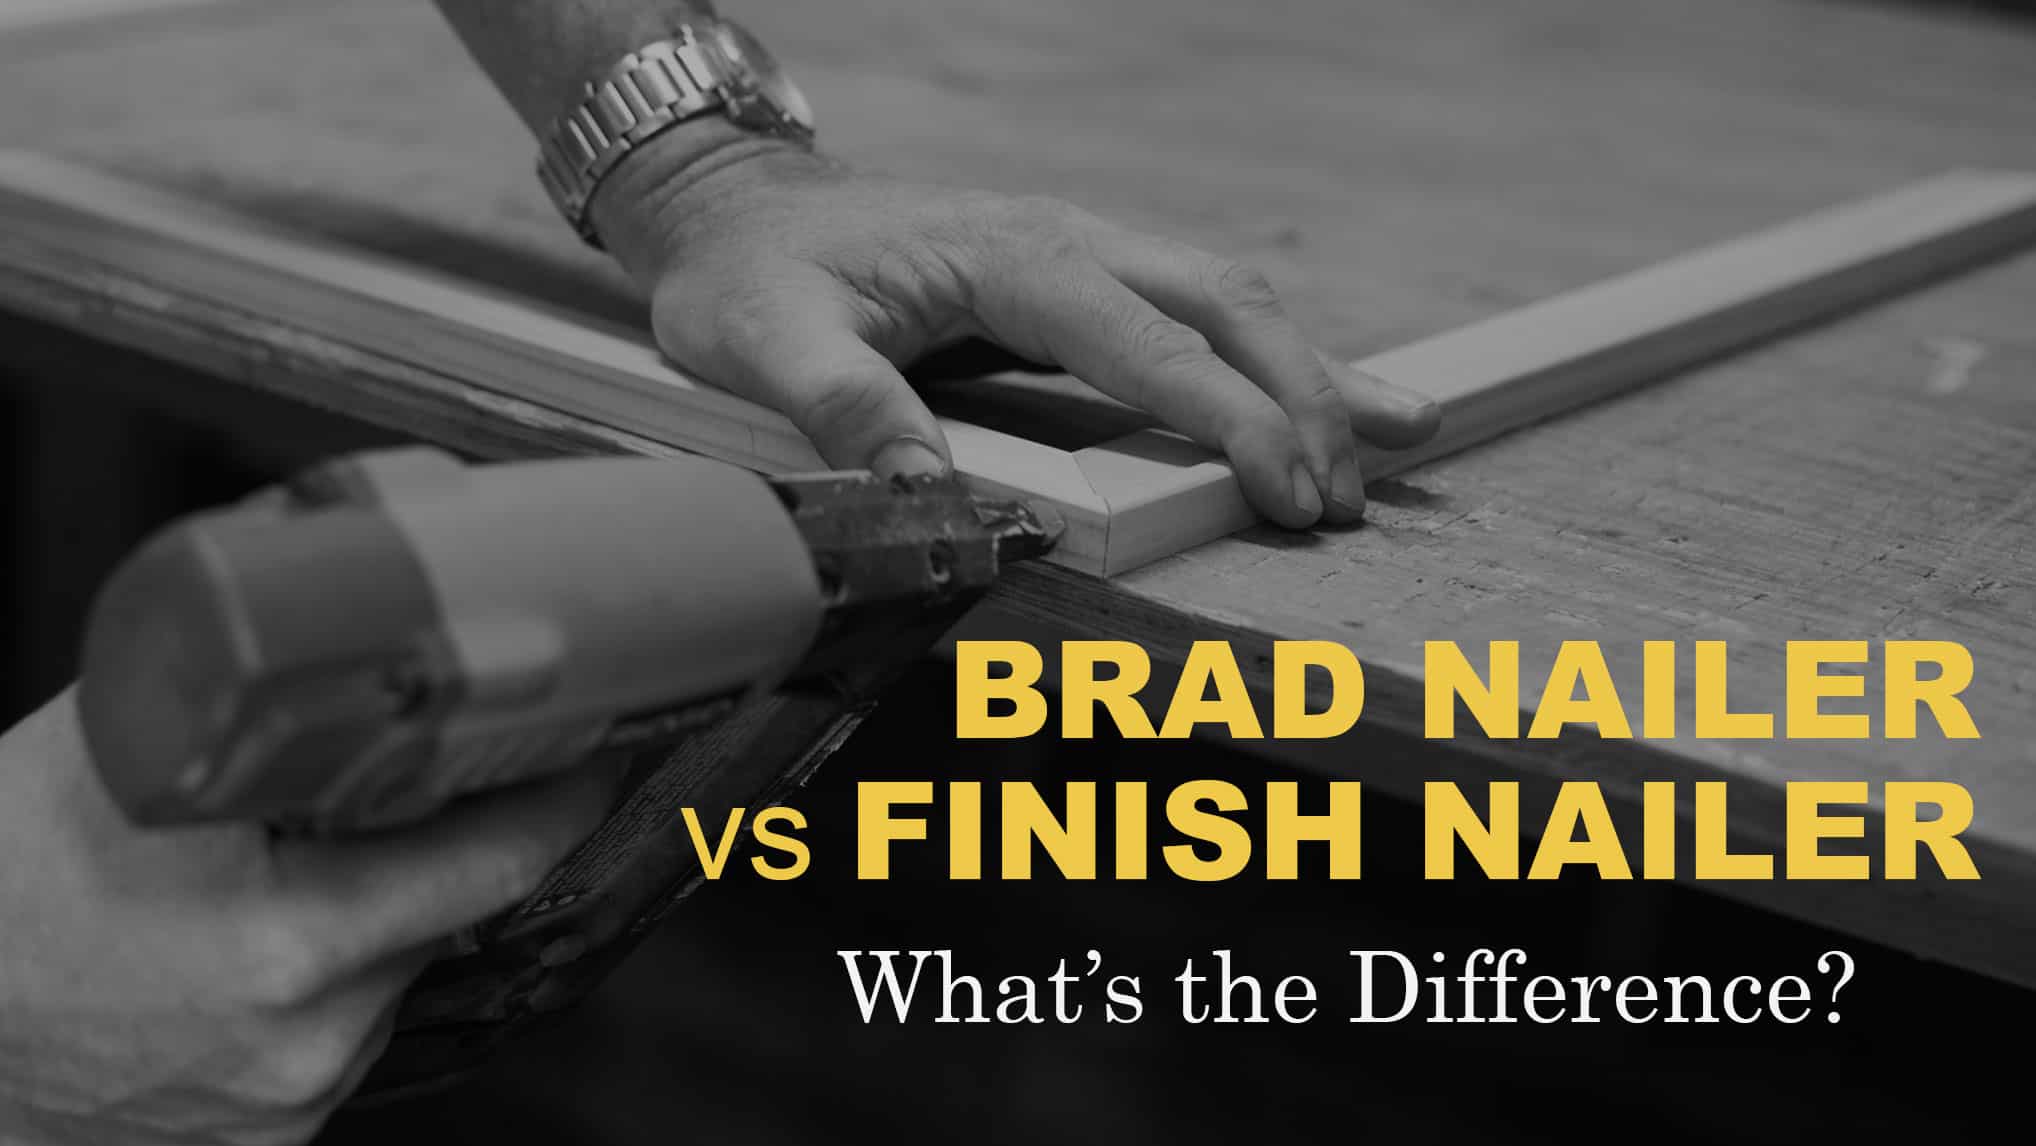 Can You Use Brad Nails in a Finishing Nailer 